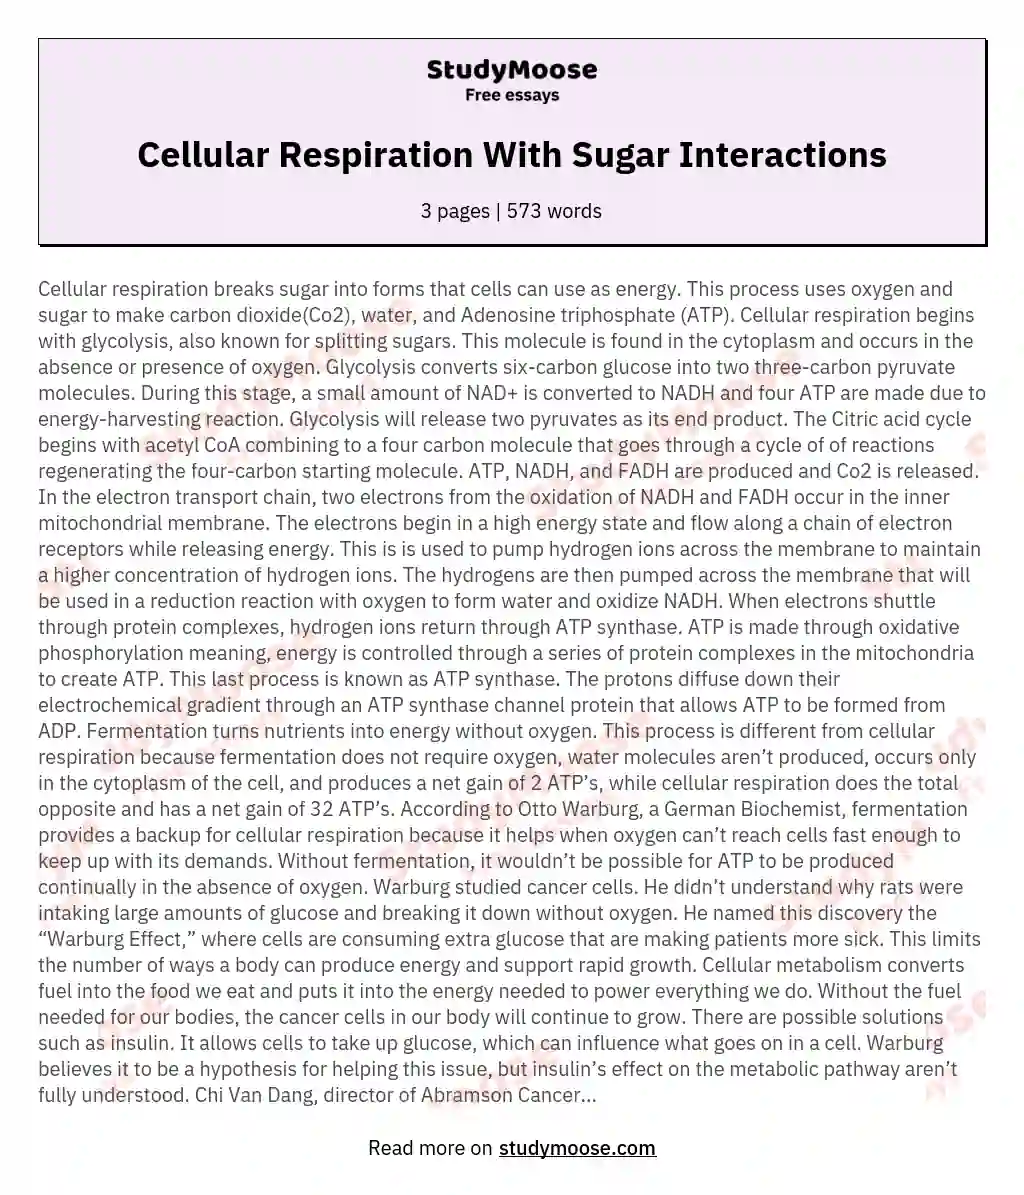 Cellular Respiration With Sugar Interactions essay